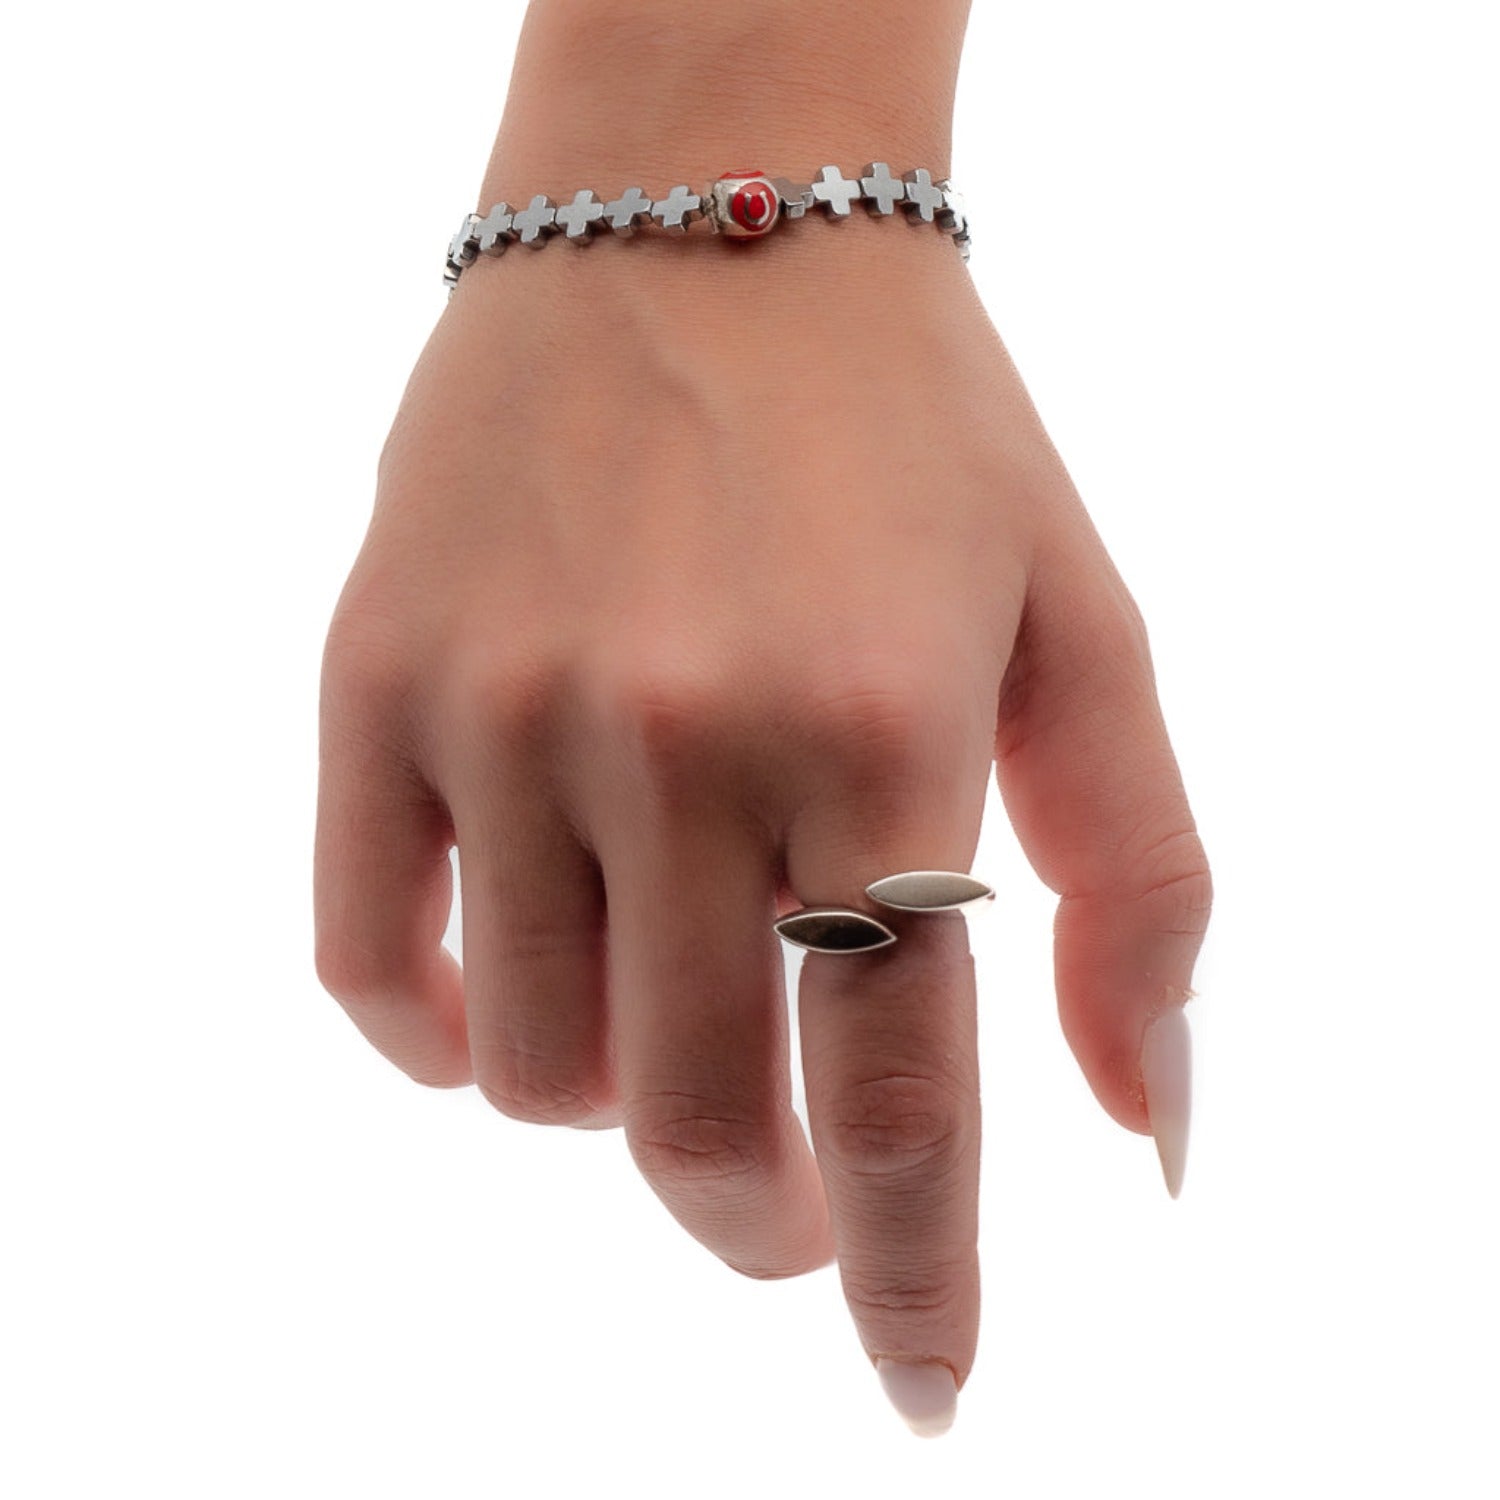 Experience the versatility of the Silver Color Lucky Charms Bracelet as the model wears it, showcasing its stylish design and meaningful symbolism.